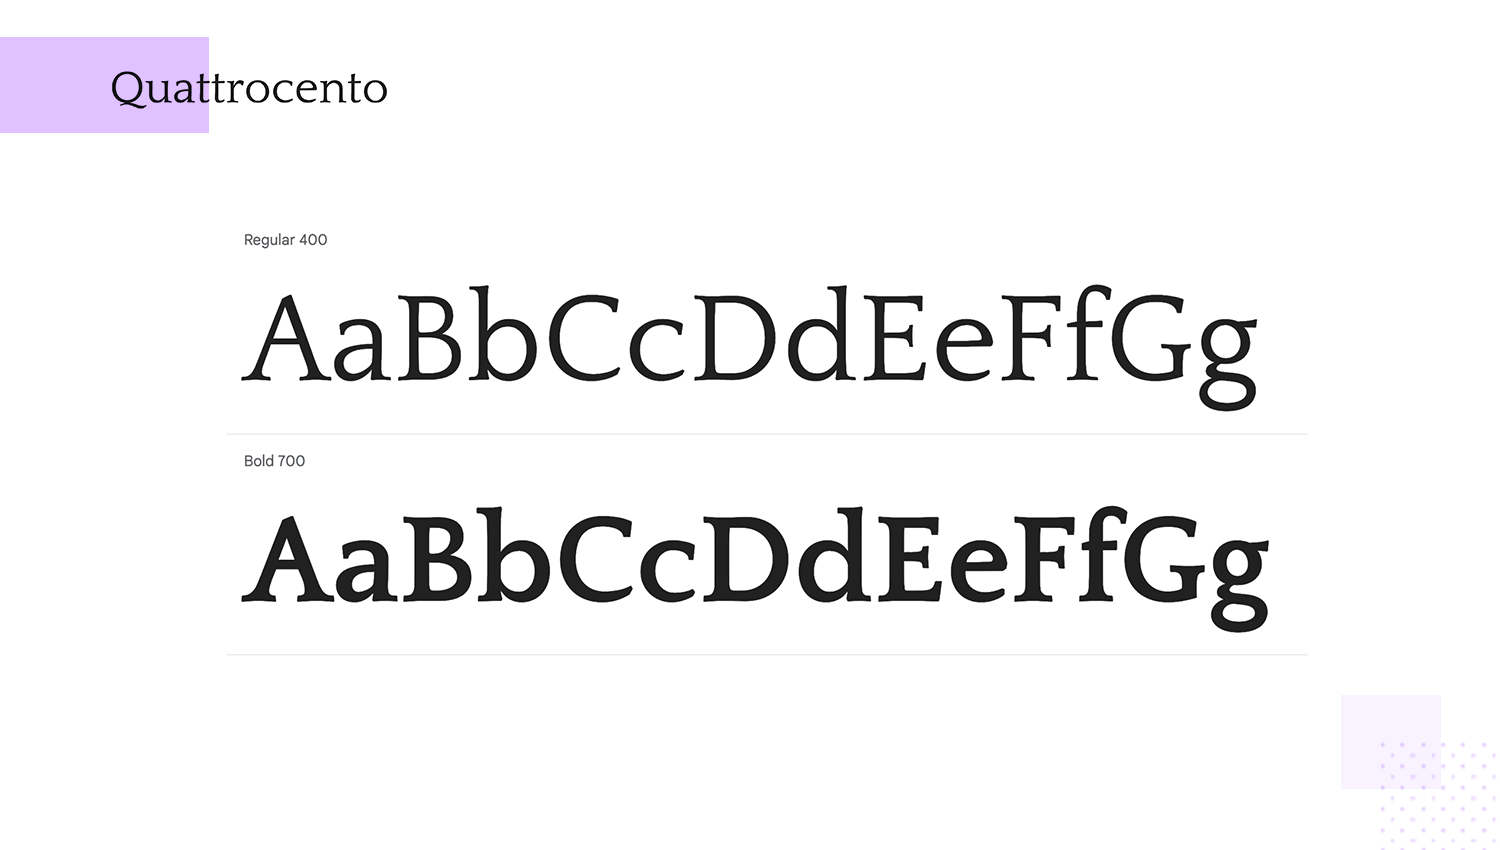 Quattrocento font showcase with Regular and Bold weights